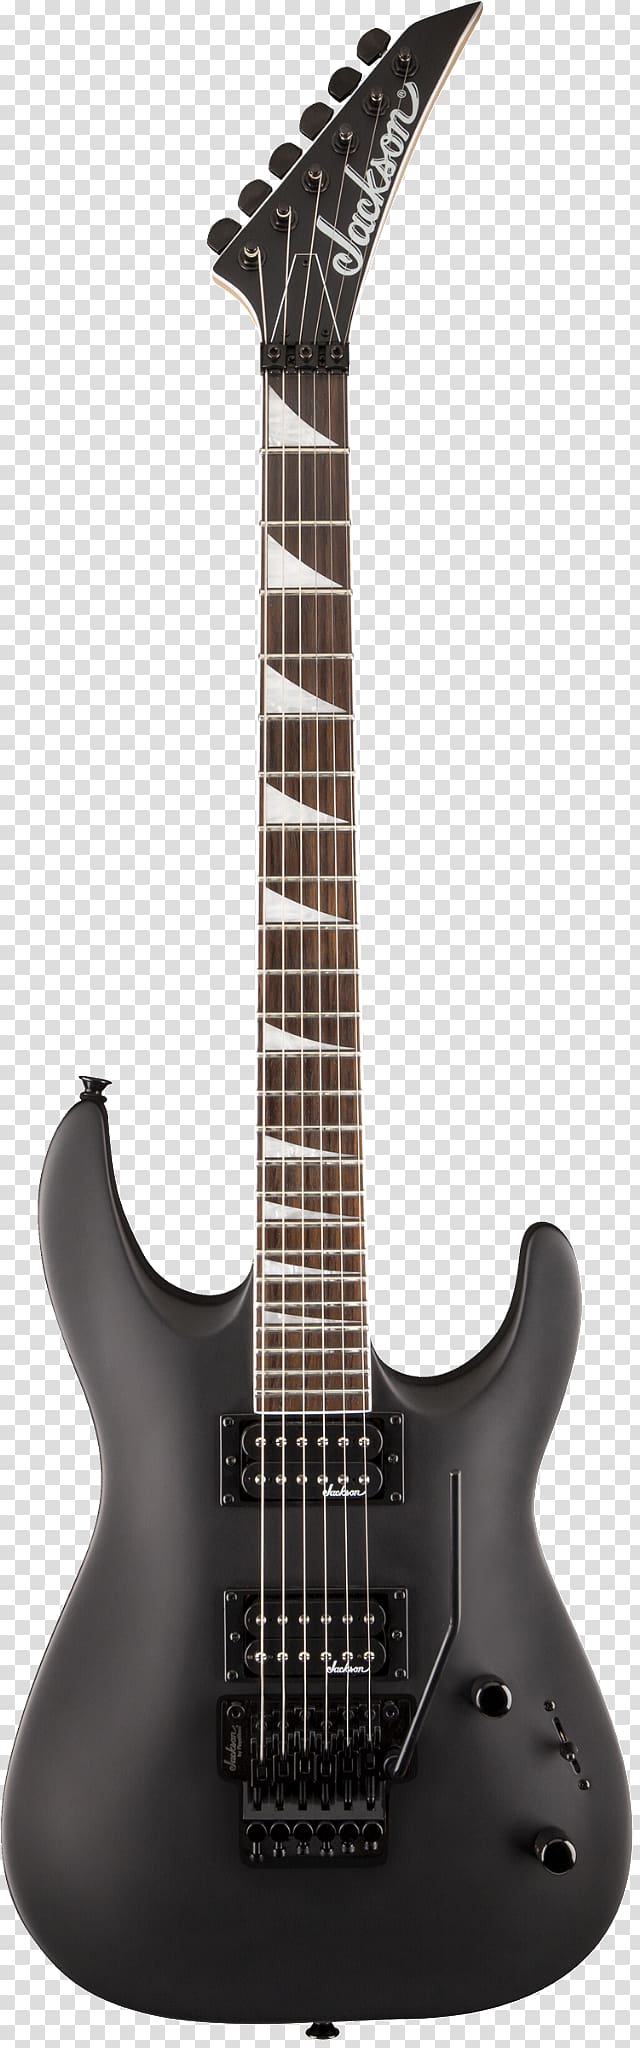 Jackson Guitars Jackson Dinky Electric guitar Jackson JS32 Dinky DKA Jackson JS22, electric guitar transparent background PNG clipart